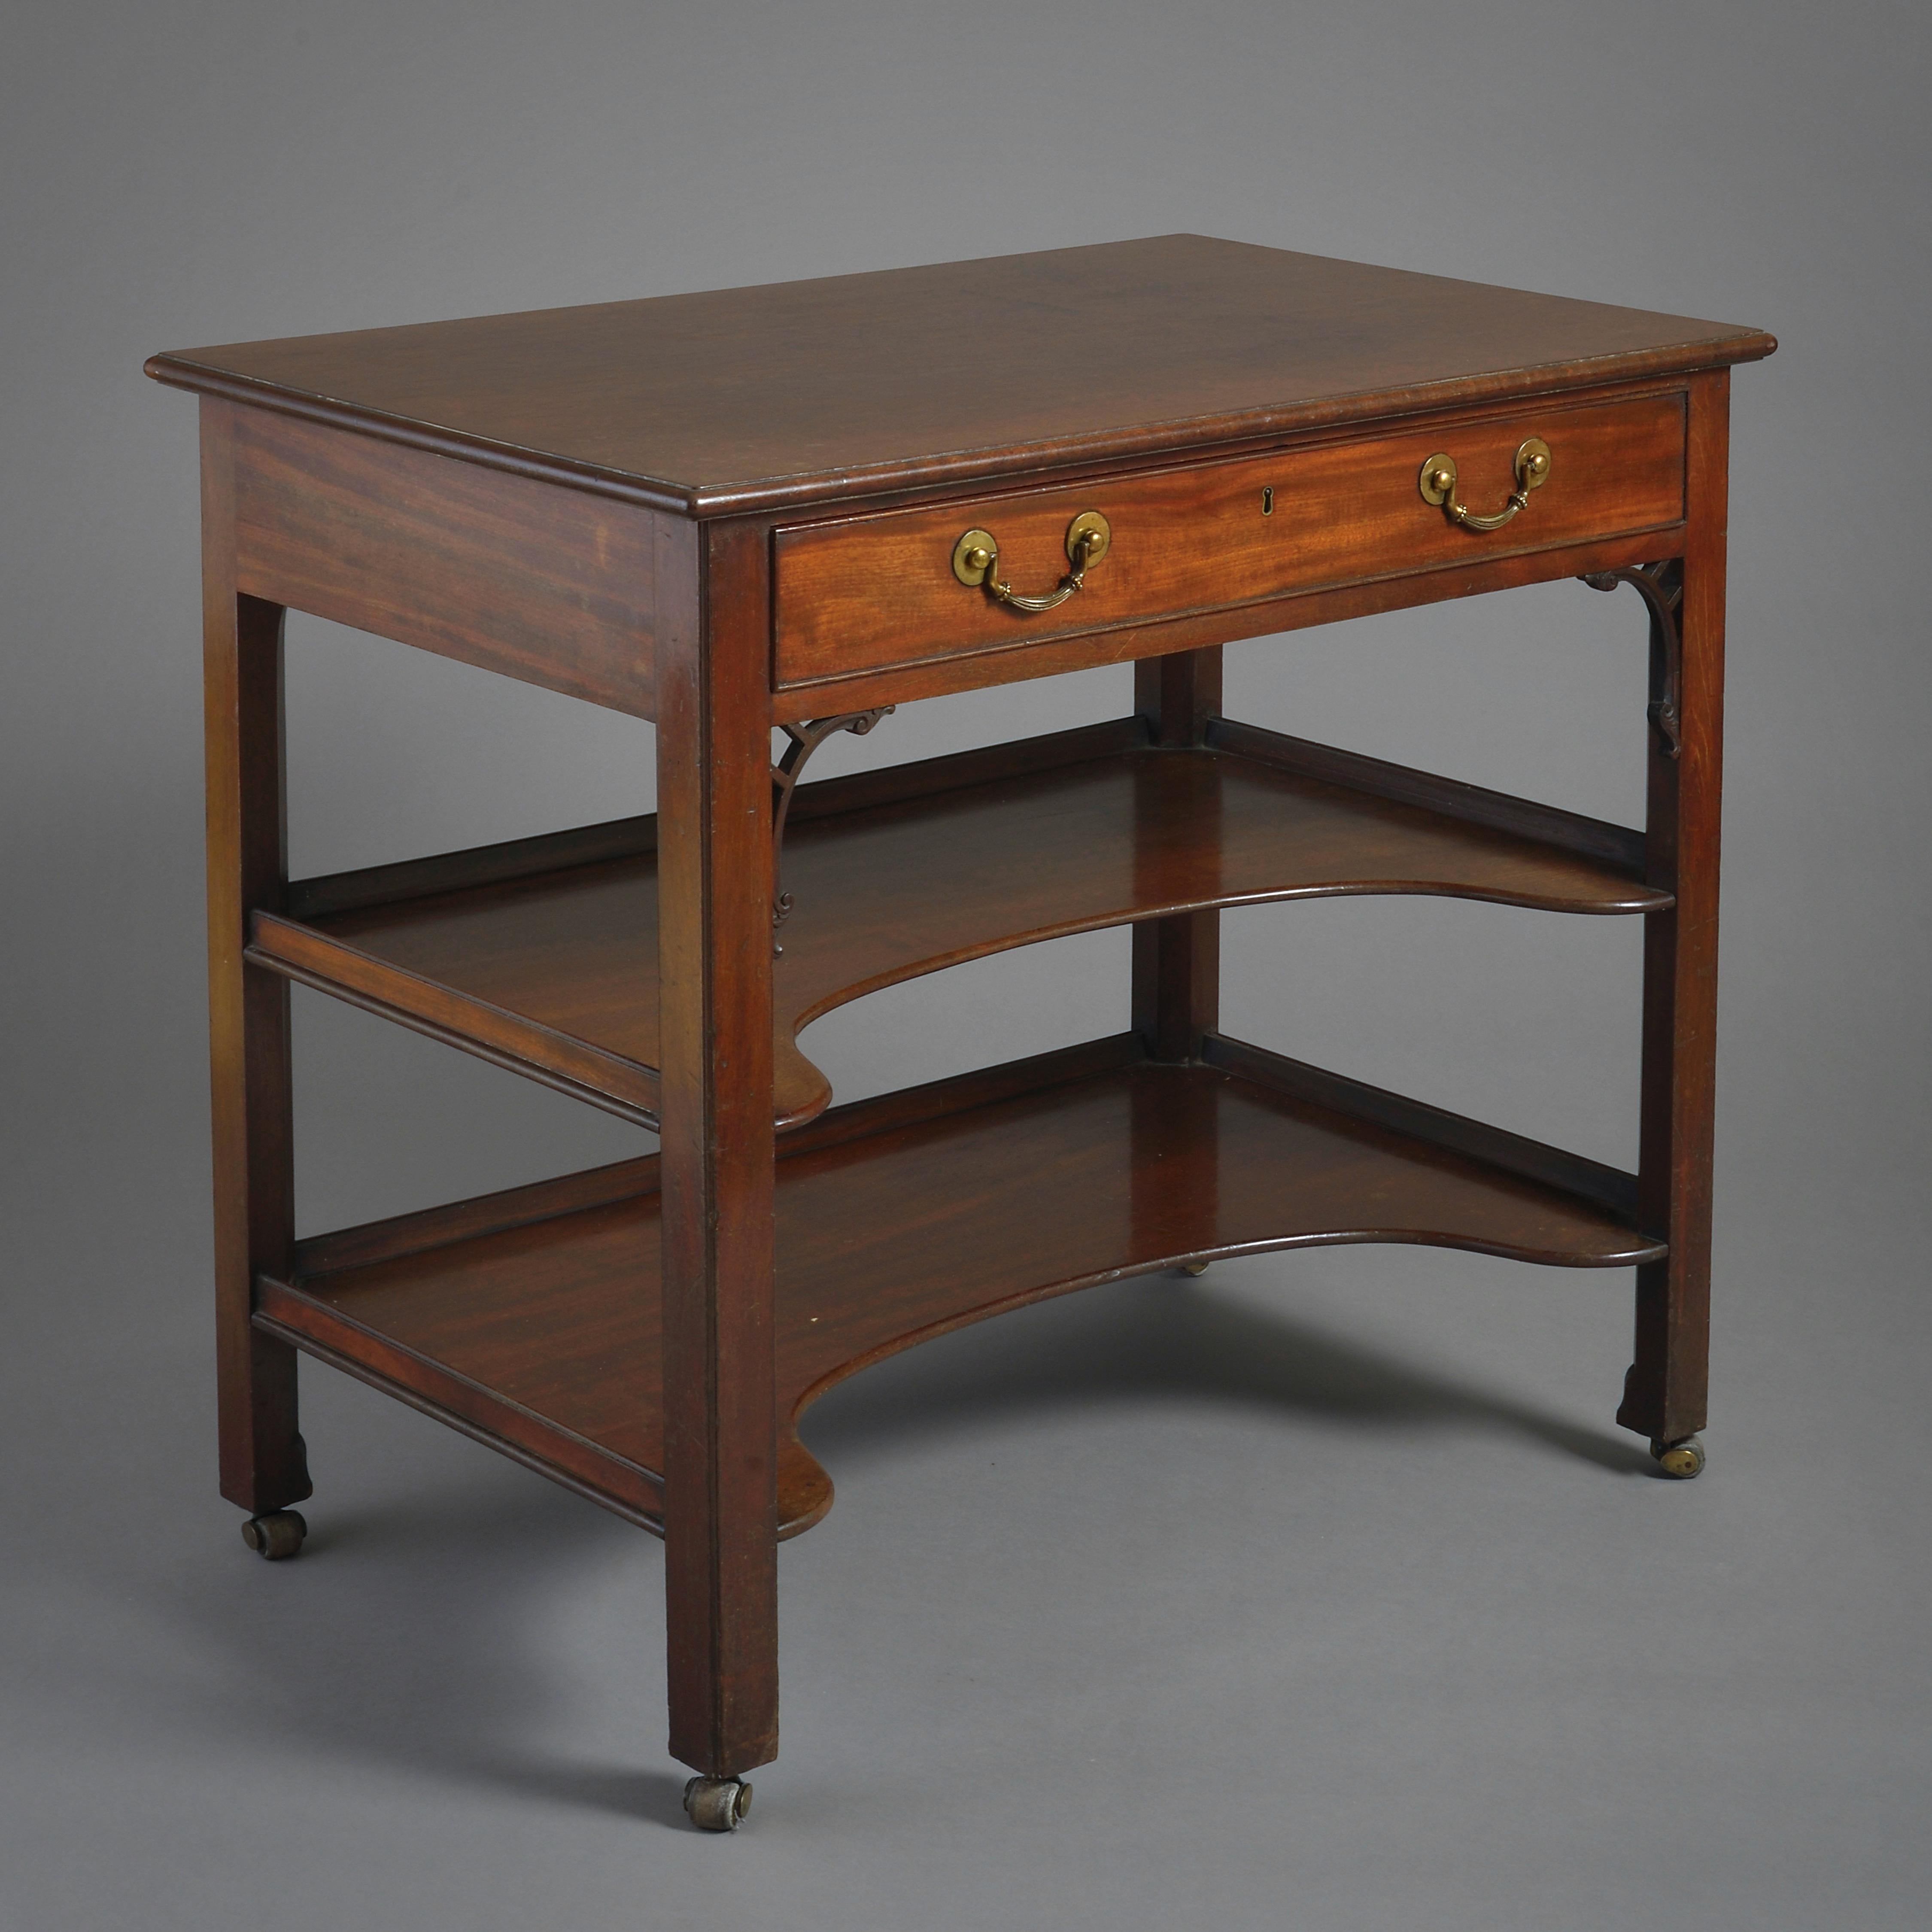 A fine George III mahogany three-tier side table, circa 1760.

With finely figured top above a frieze drawer, scroll brackets, and two concave galleried under-tiers on square chamfered legs. Handles original.